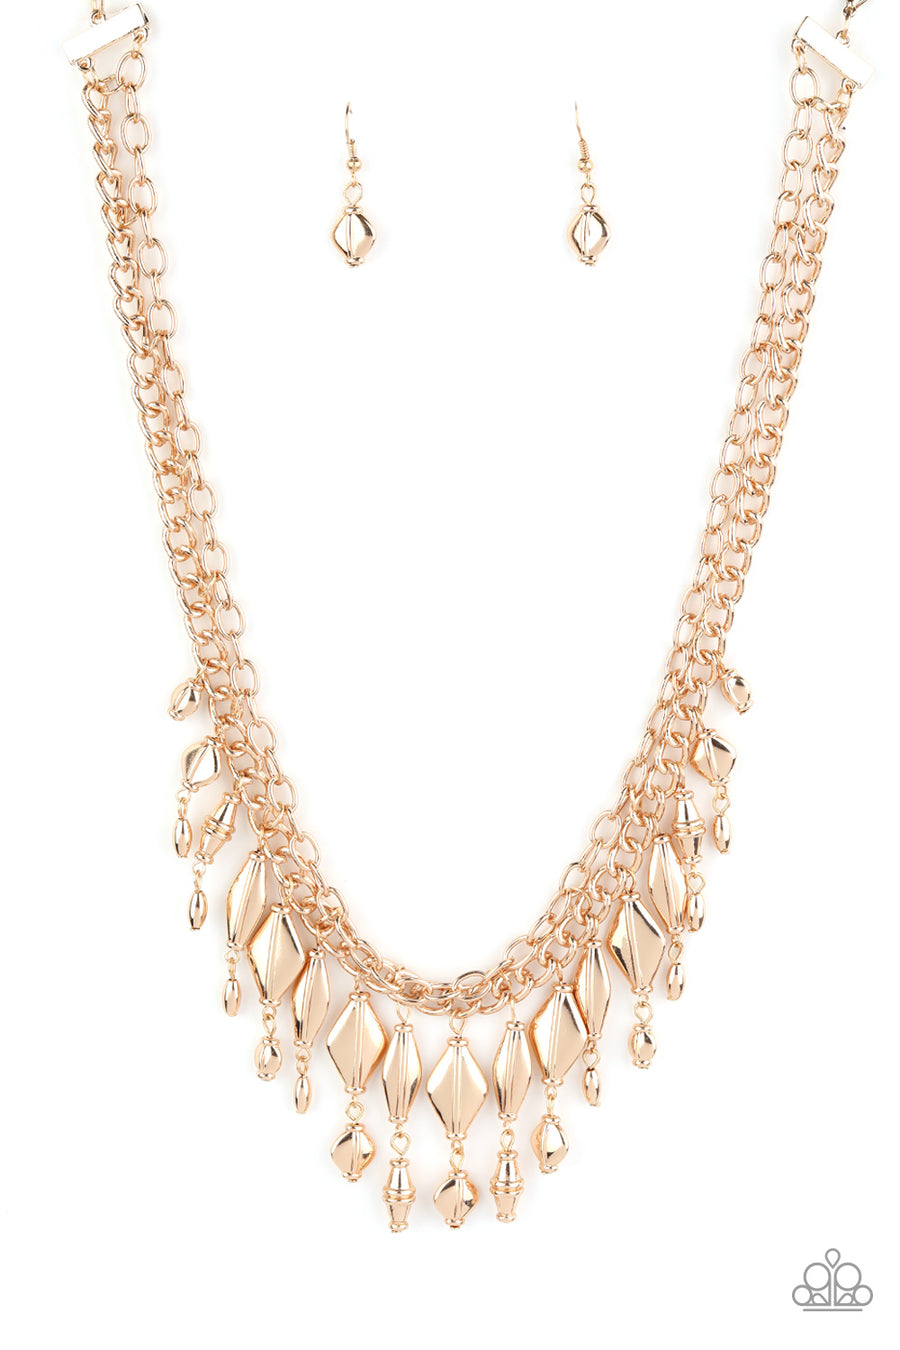 Trinket Trade - Gold Beaded Necklace- Paparrazi Accessories